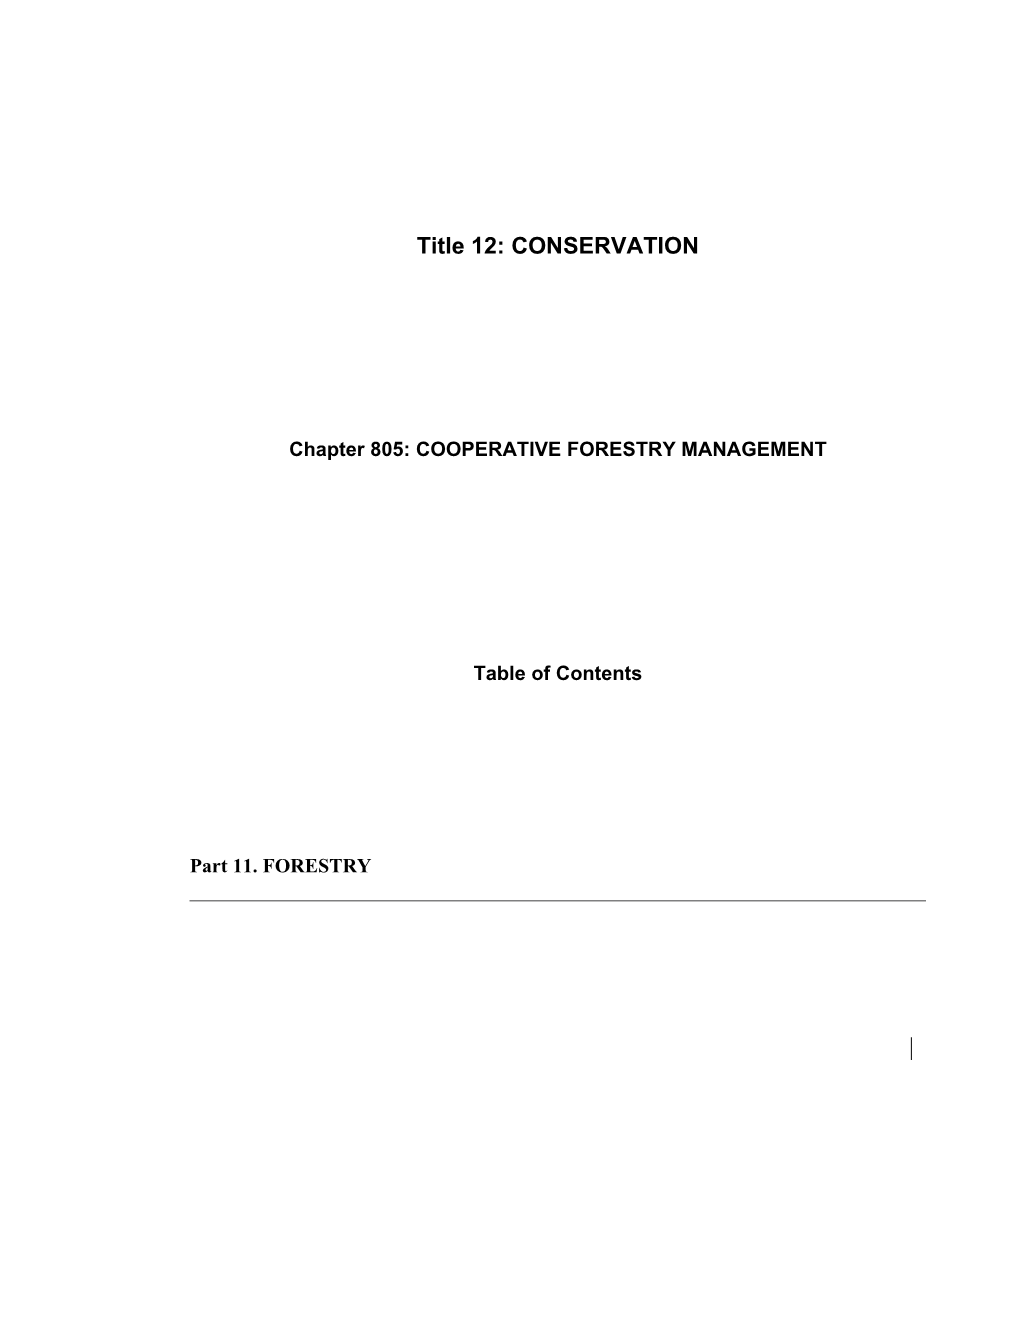 MRS Title 12, Chapter805: COOPERATIVE FORESTRY MANAGEMENT